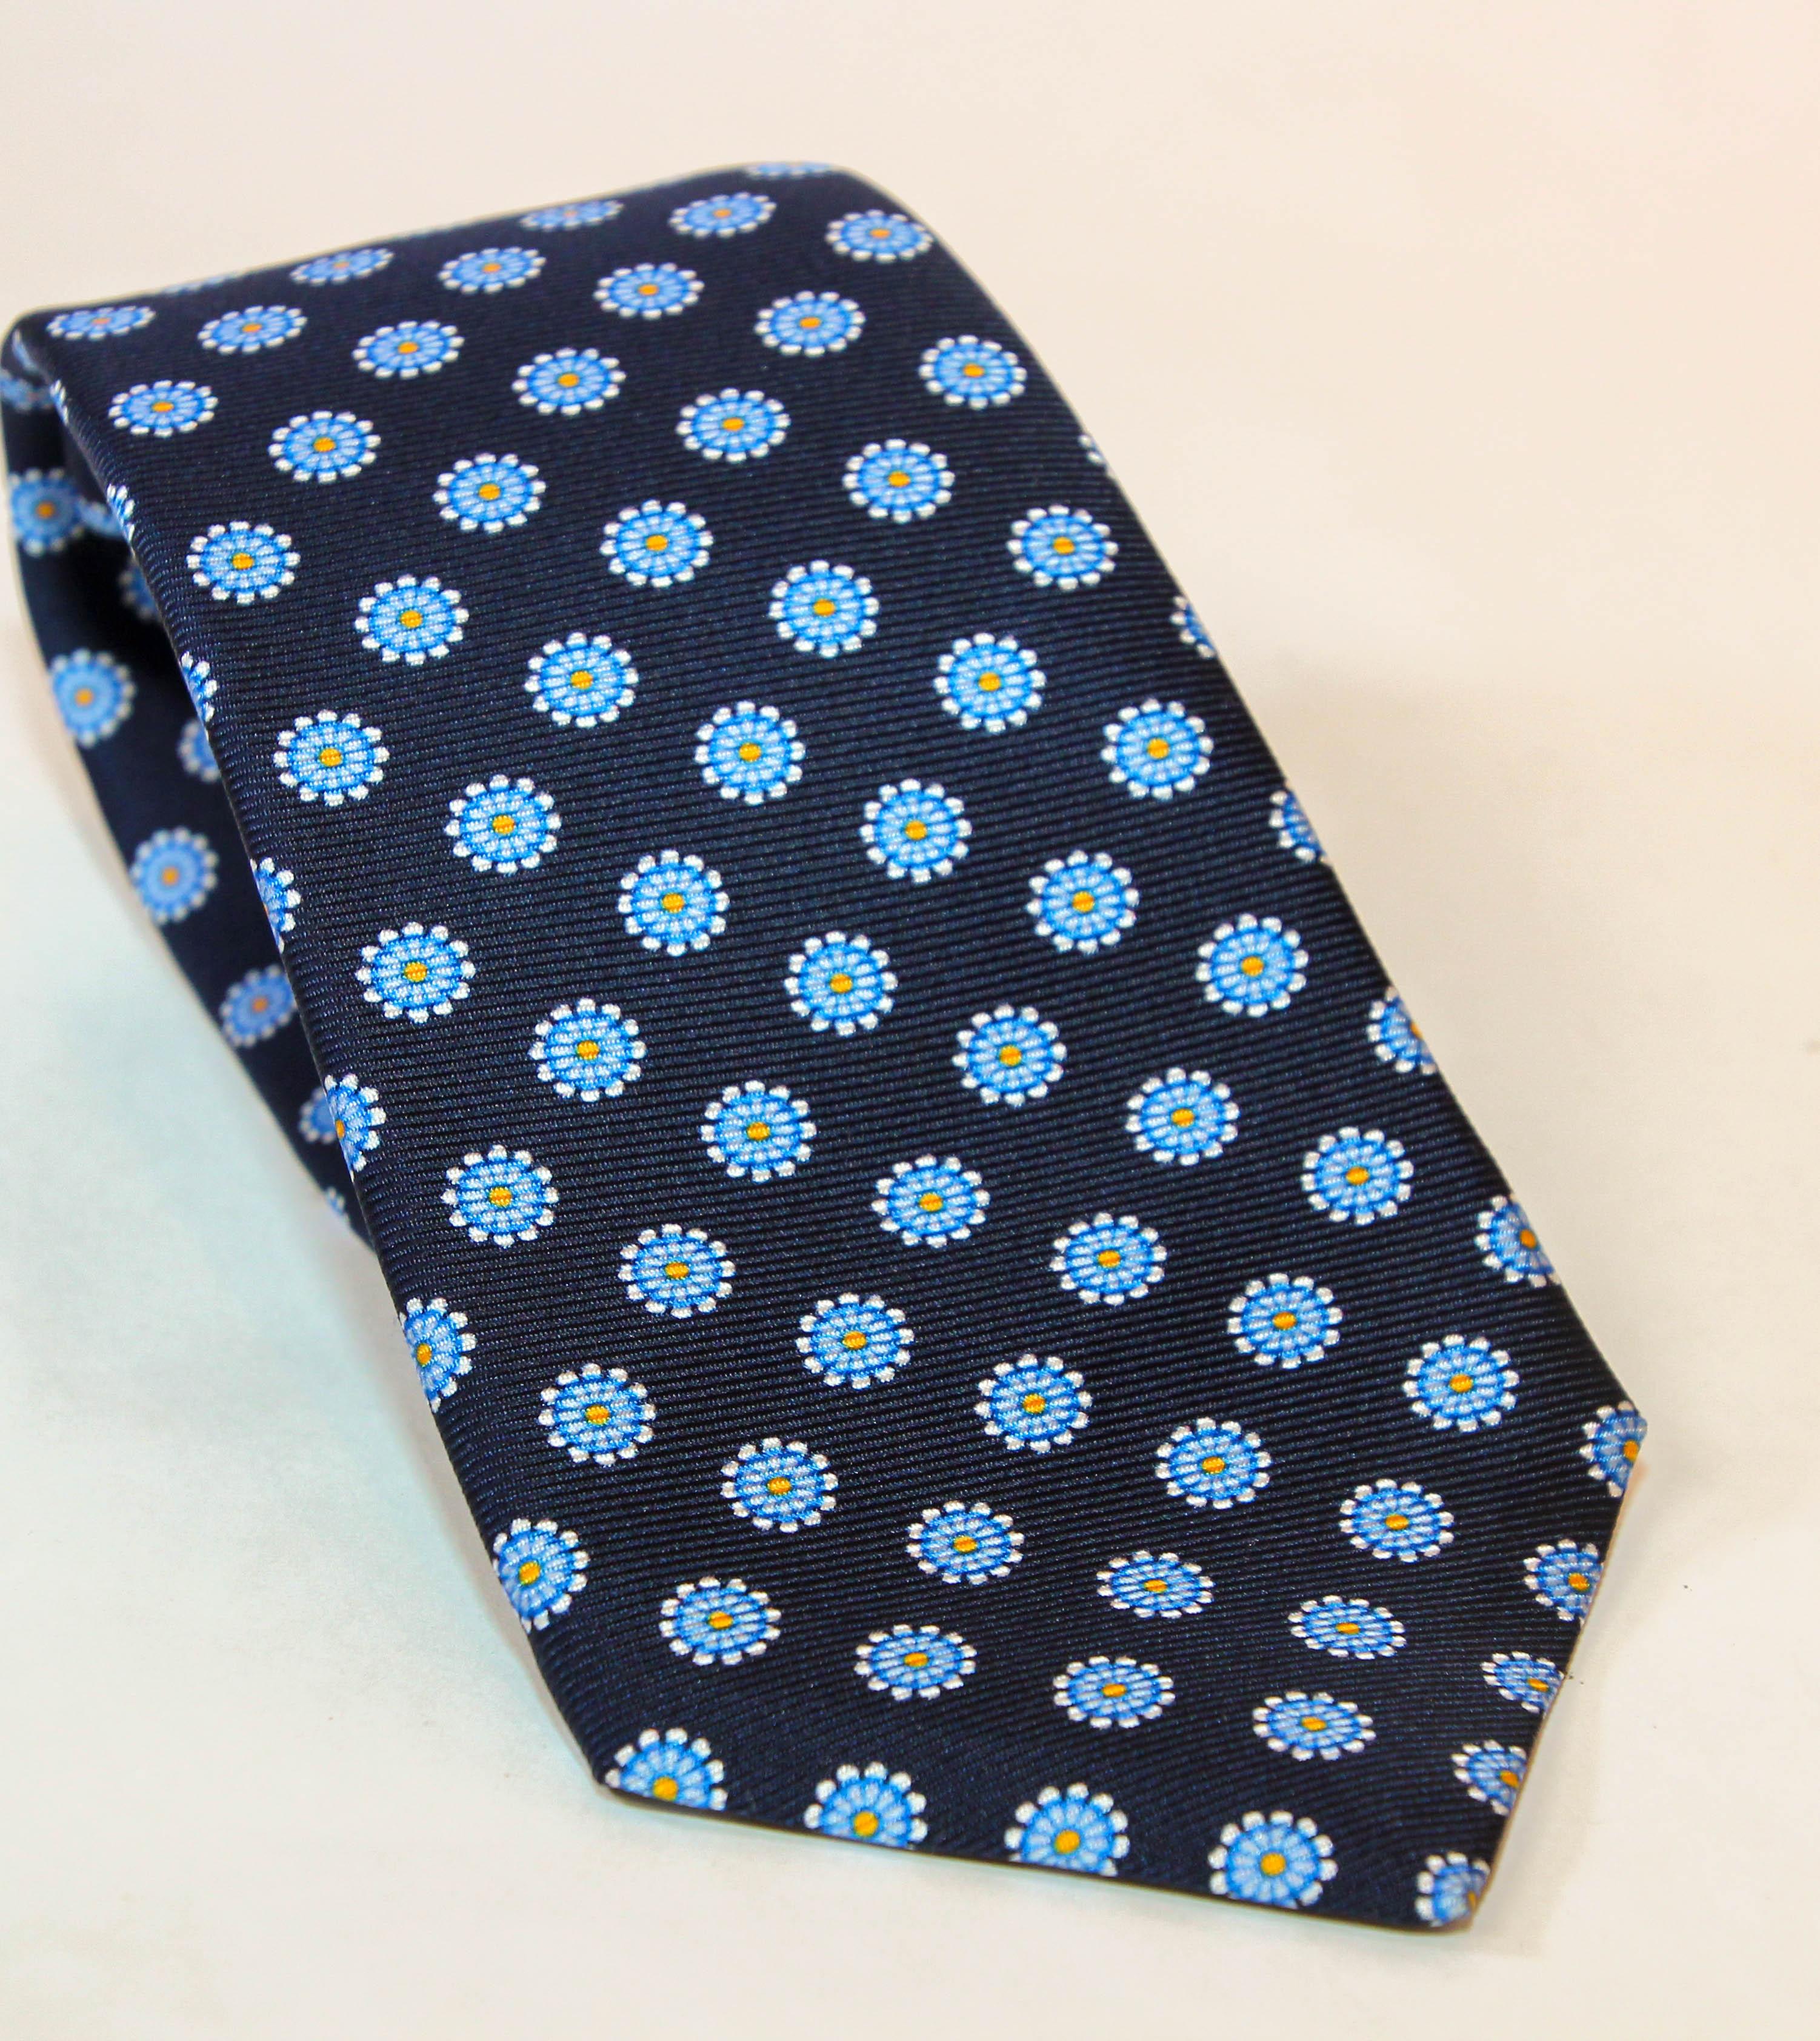 KITON blue silk tie.
Gorgeous necktie comes in blue in a silk twill with a all over abstract print. Made in Italy. 
Very Good not used Condition with Original Tag.
Measurements: Width: 3.5 Length: 55 inches.
About: Kiton is a prestigious Italian